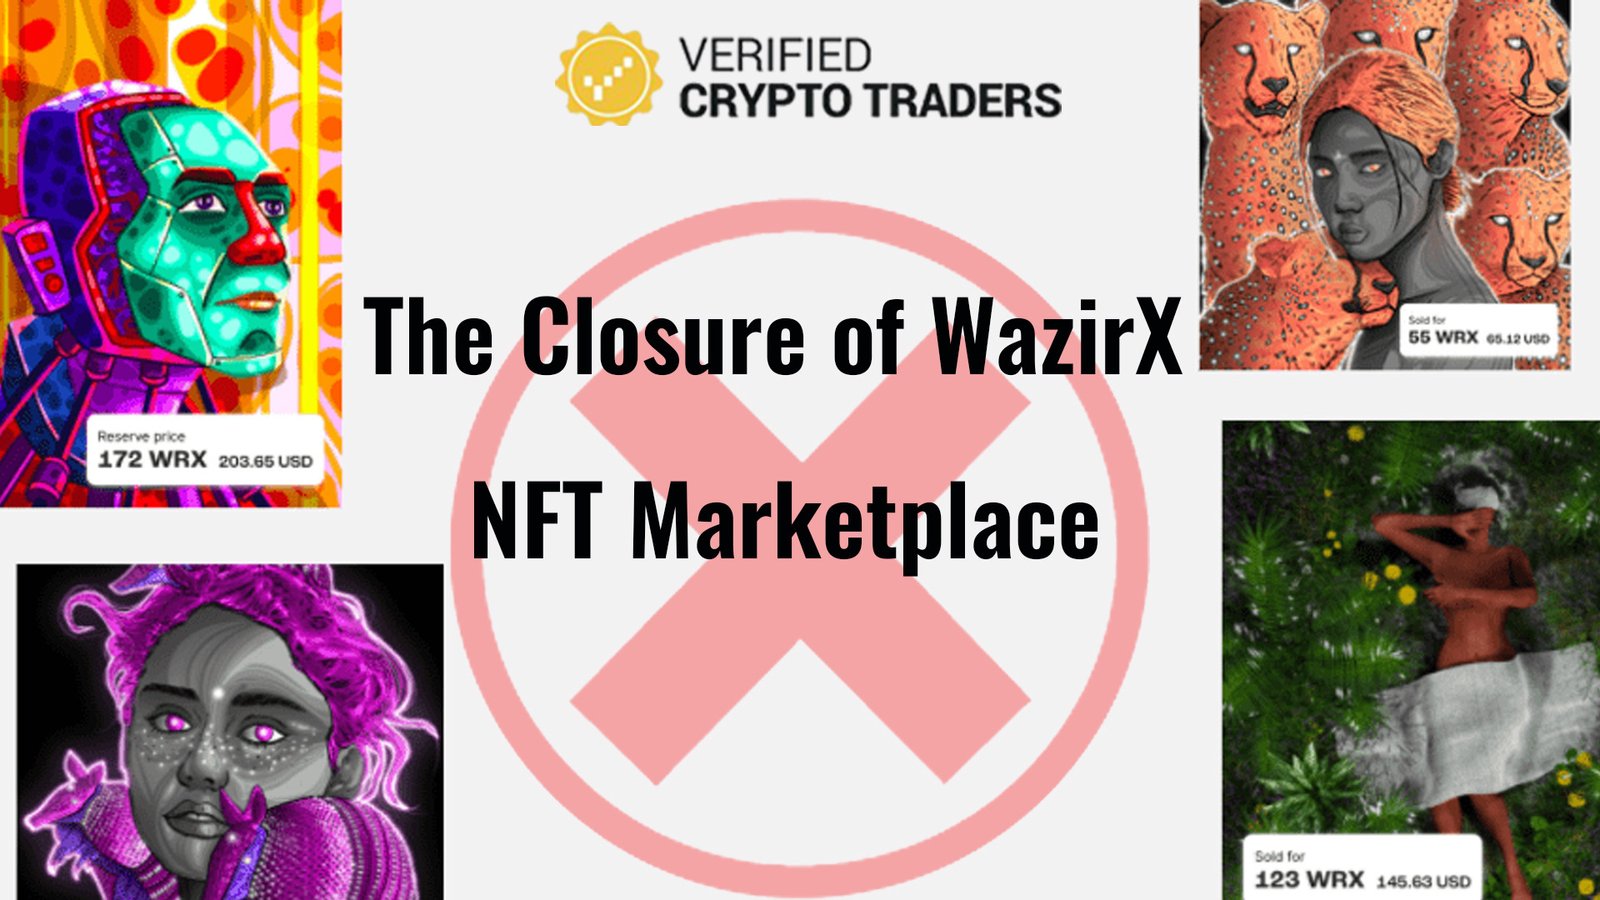 The Closure of WazirX NFT Marketplace: What Happens to Users and What's Next for the Platform?